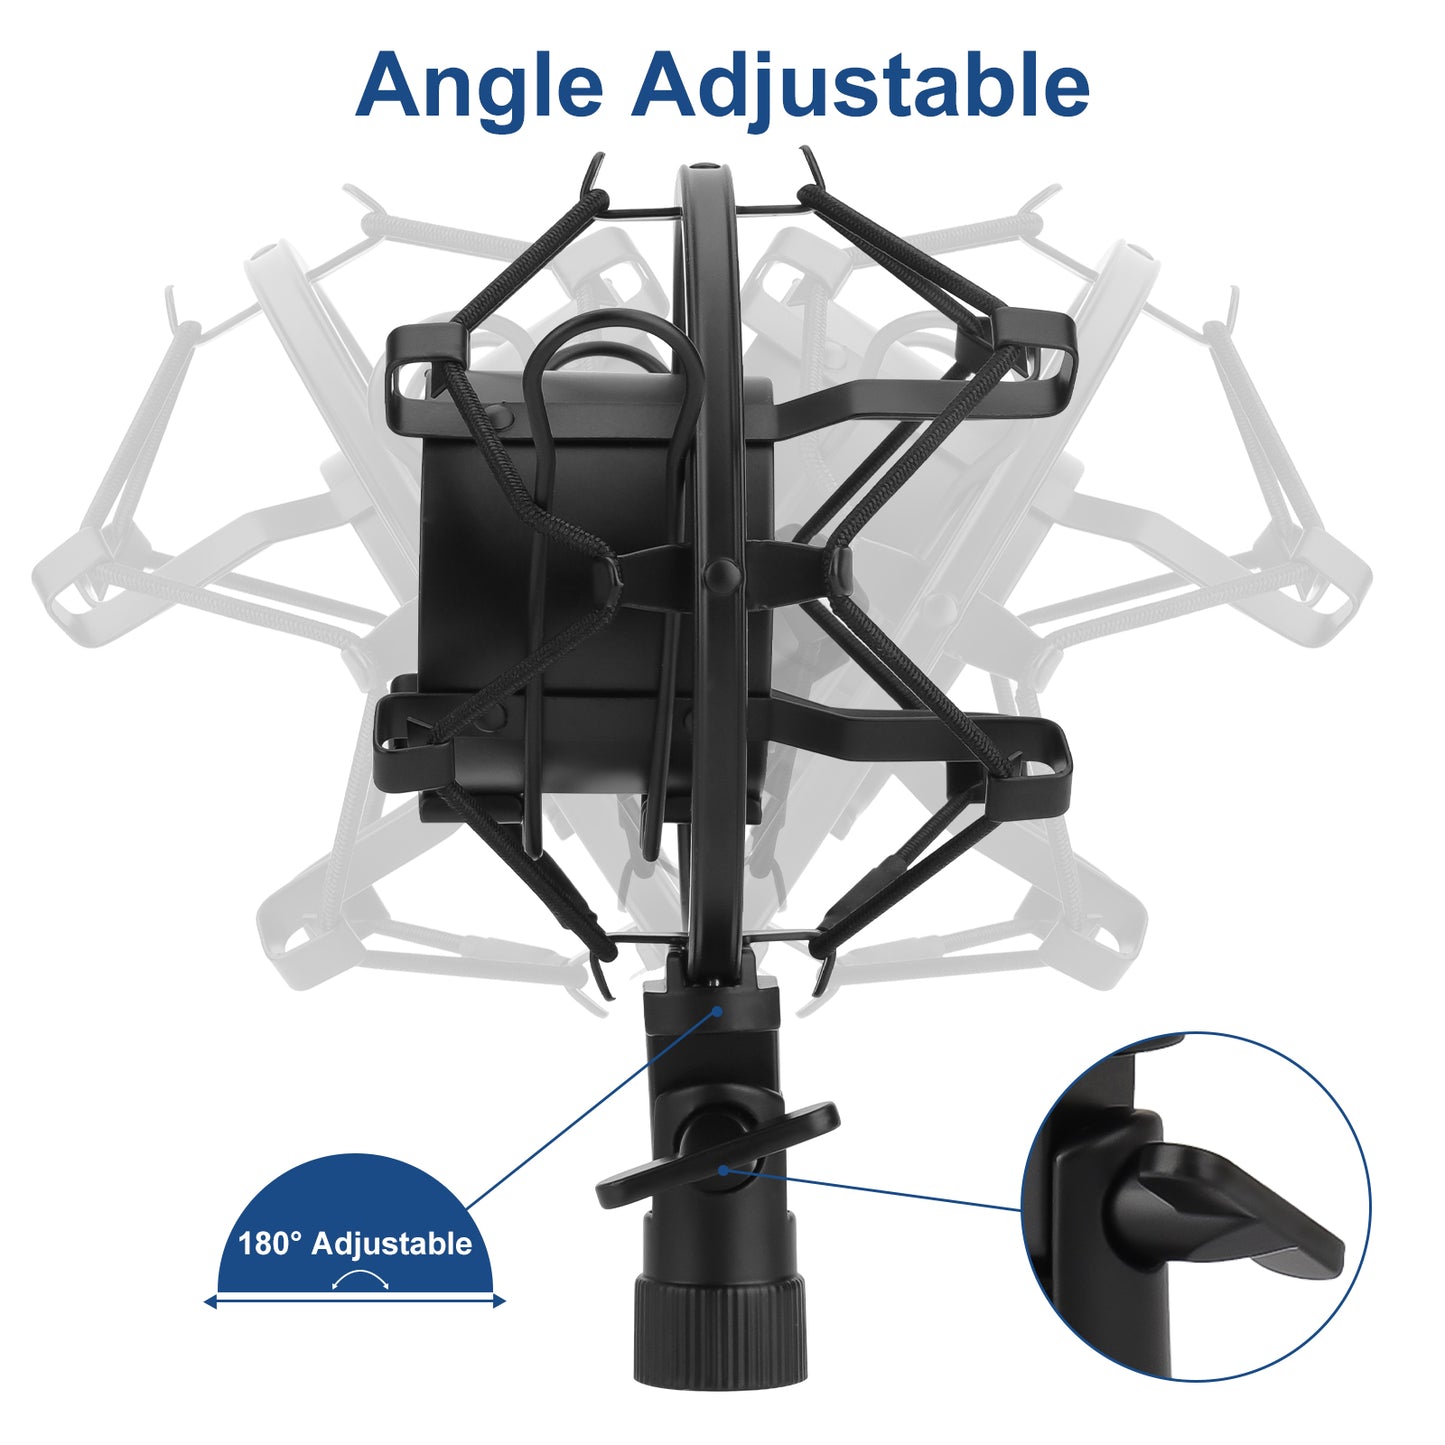 Universal Microphone Shock Mount - for Mics (48-53mm), Ensuring Stability and Enhanced Audio Quality,Compatible with AT2020, Rode NT1A, Heil PR40, Neumann TLM102, and More